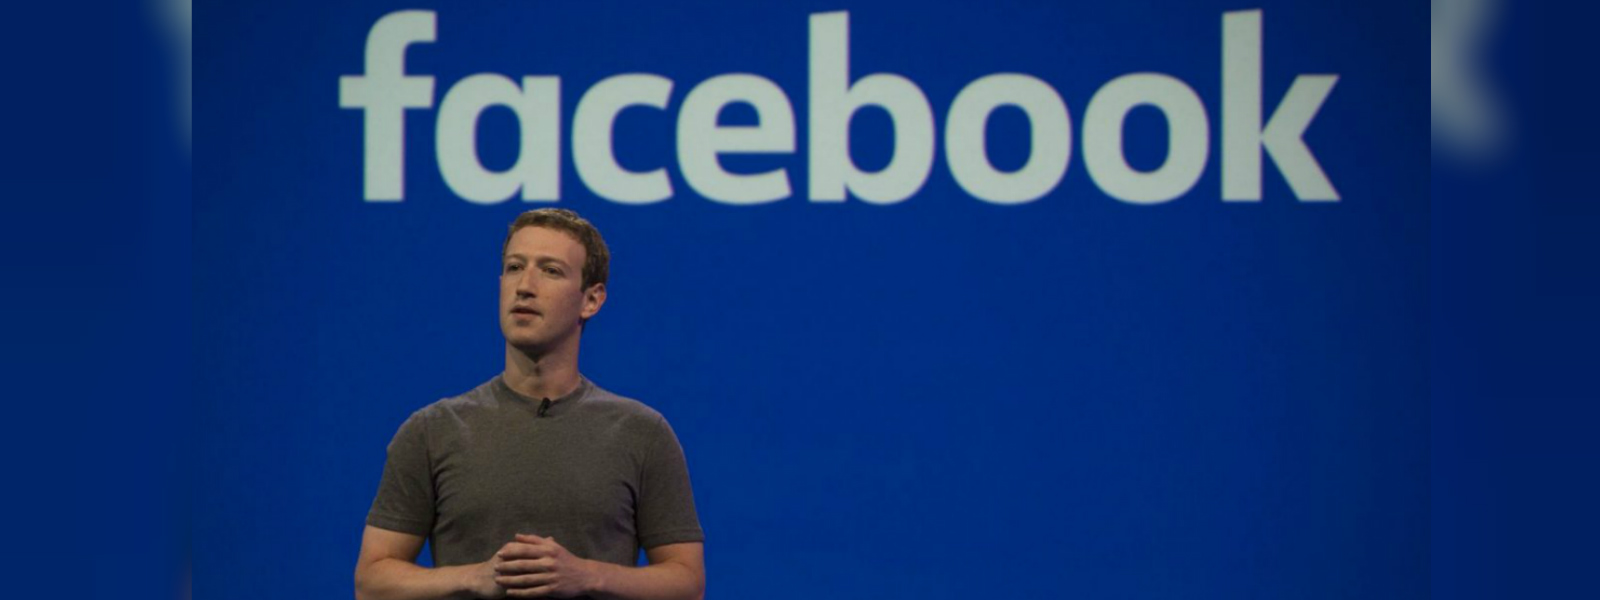 FB plans to launch 'GlobalCoin' currency in 2020